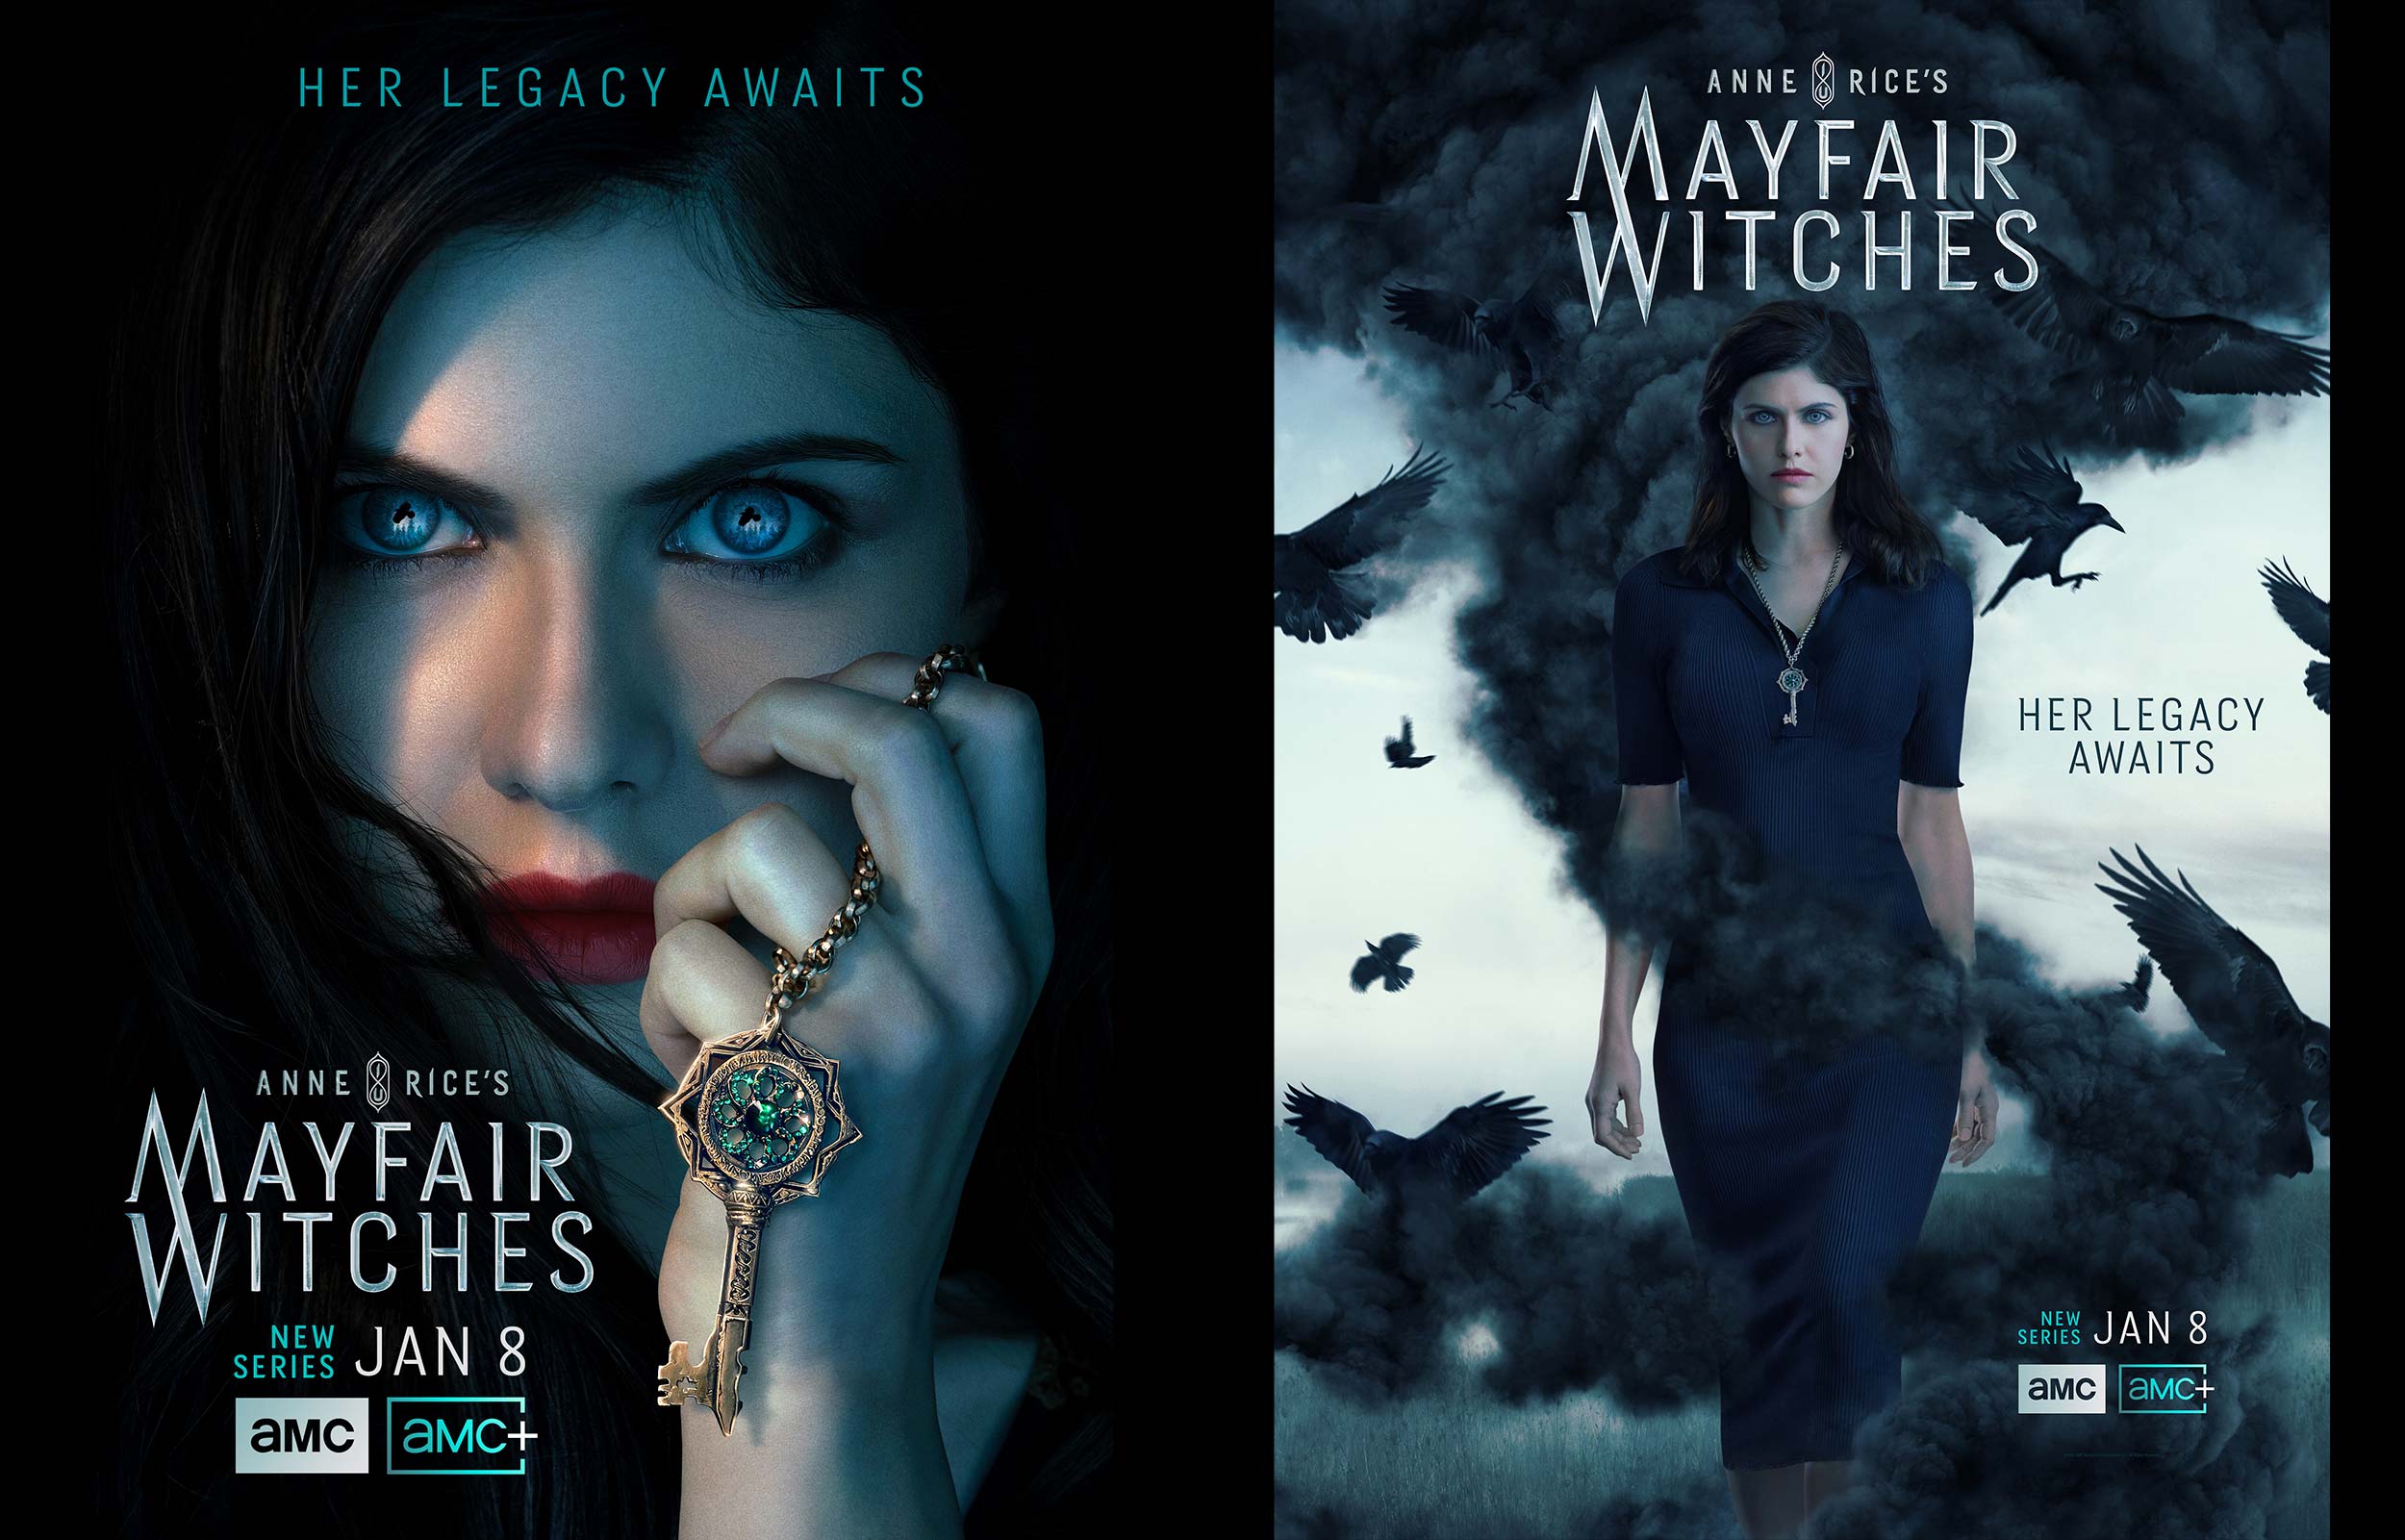 WEB_MayfairWitches_KA_poster_2x3_R1